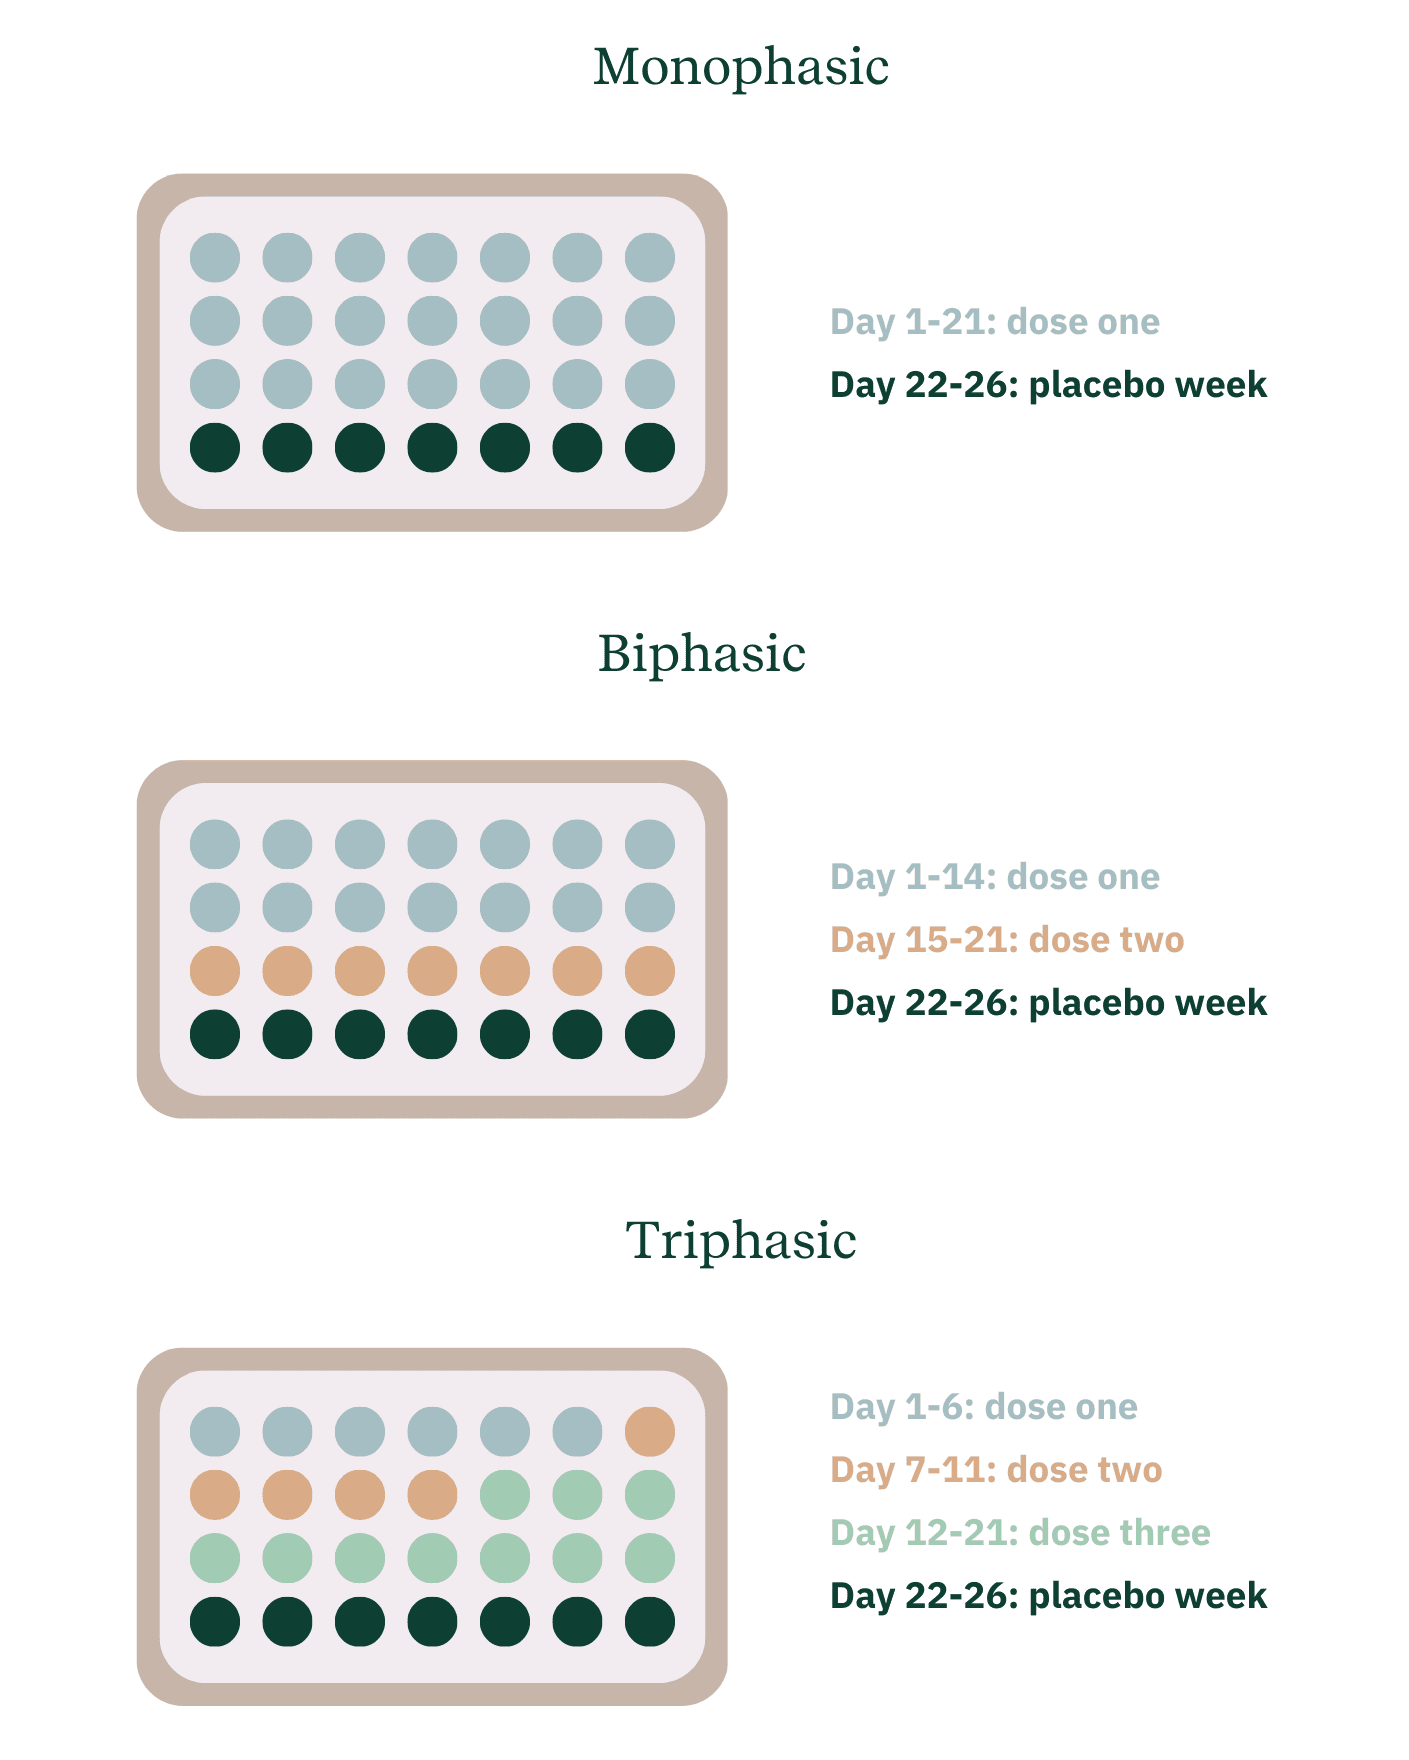 Triphasic vs biphasic vs monophasic birth control breakdown of pills throughout the pack